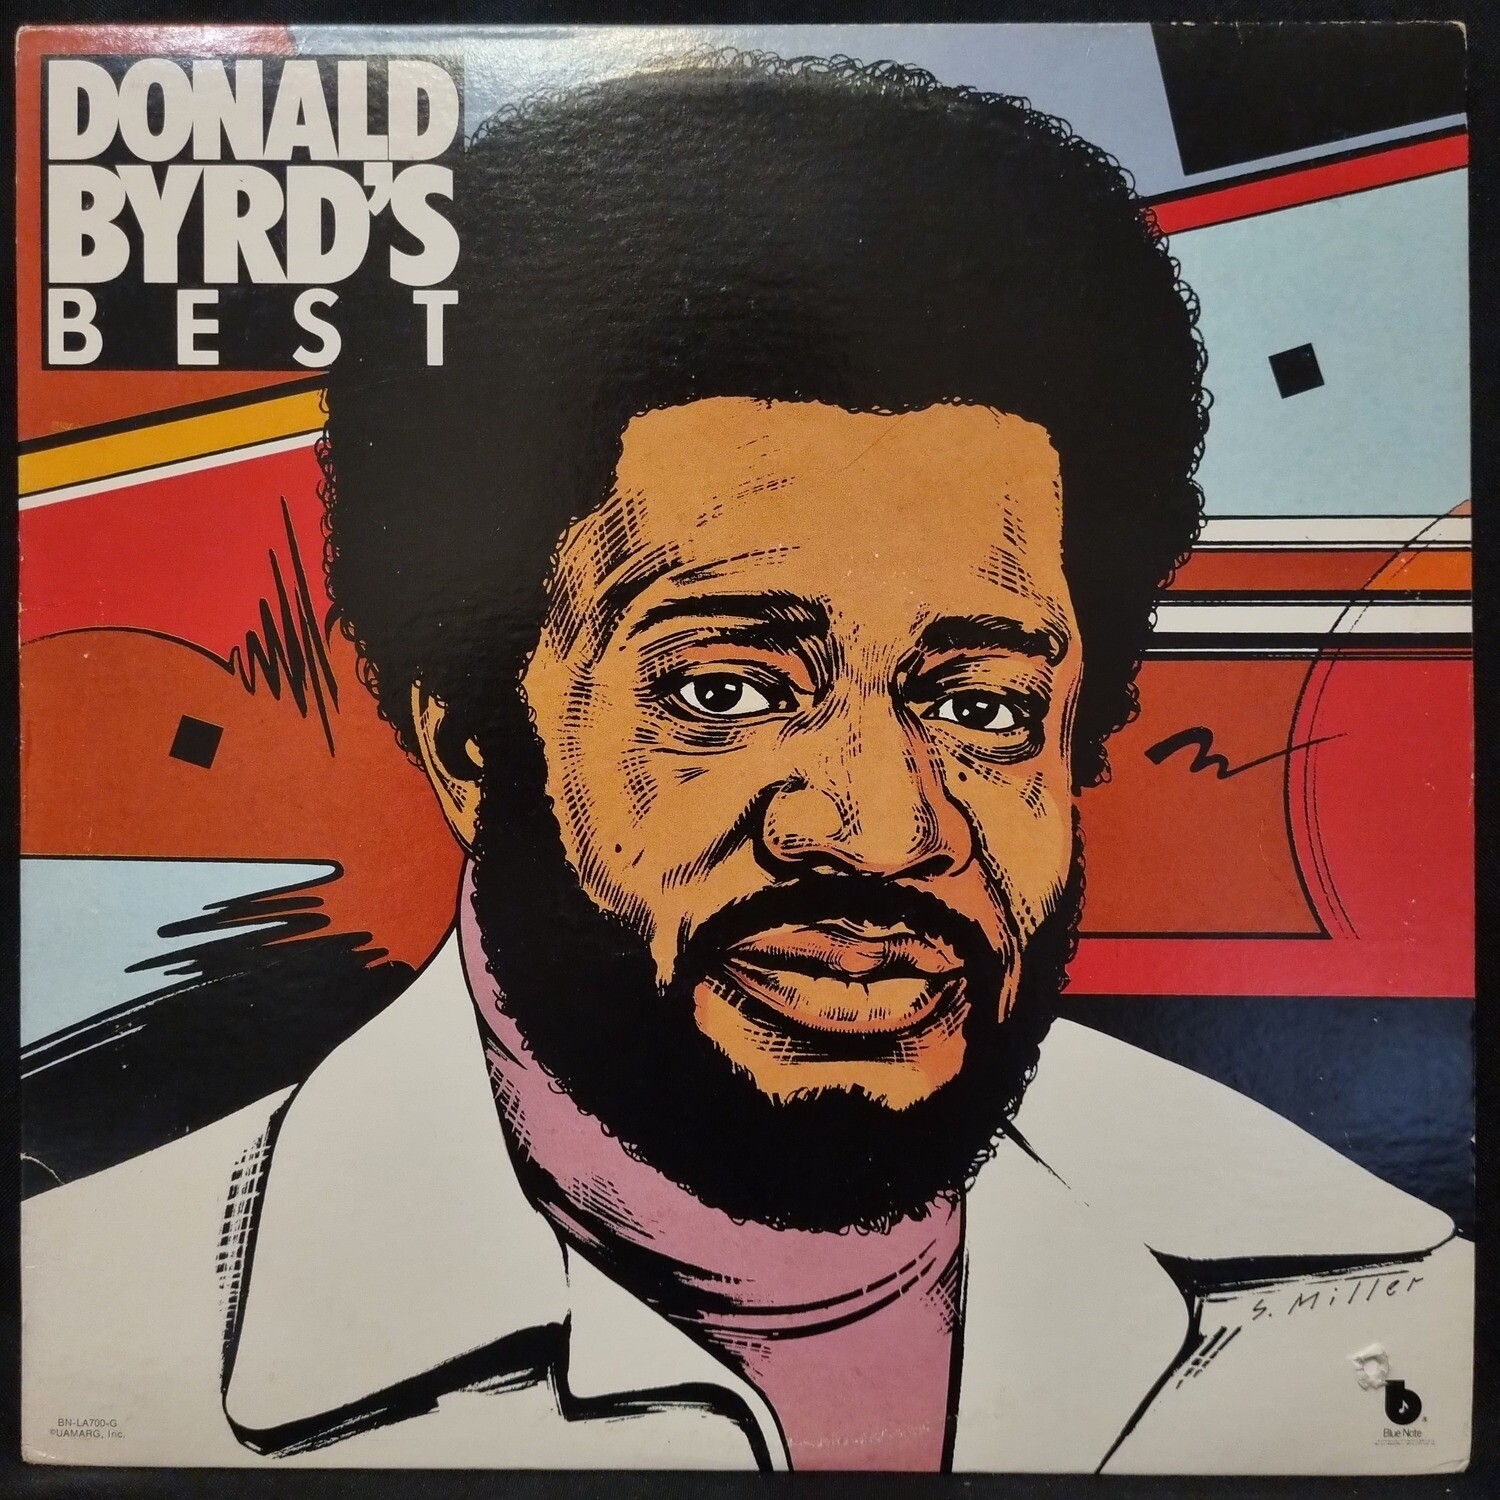 Donald Byrd- Donald Byrd's Best